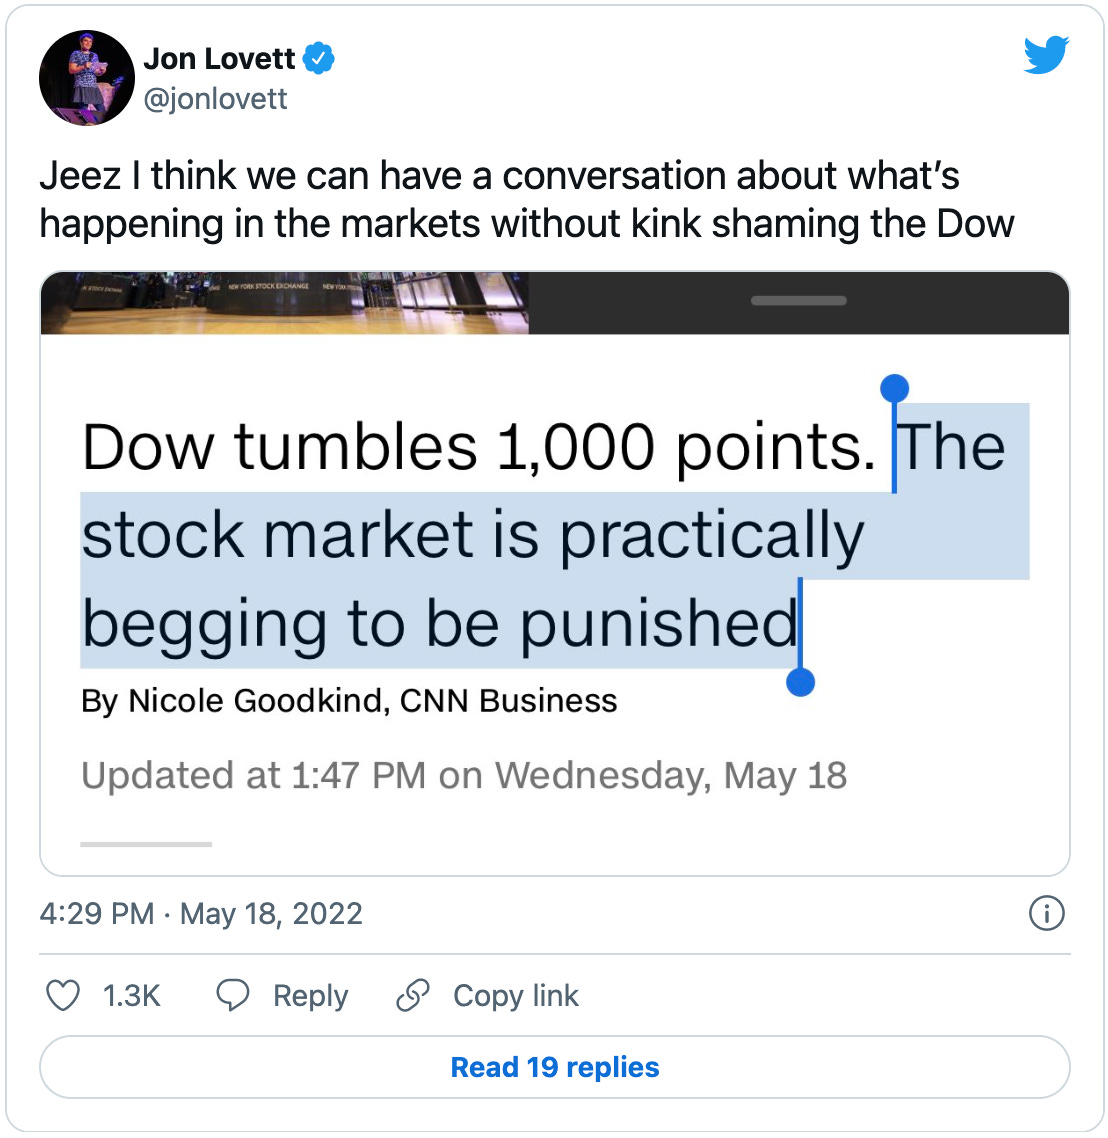 Tweet from Jon Lovett with a screenshot of a news subhead that says “Dow tumbles 1,000 points.” And highlighted: “The stock market is practically begging to be punished.” Lovett’s tweet comments: “Jeez I think we can have a conversation about what’s happening in the markets without kink shaming the Dow”